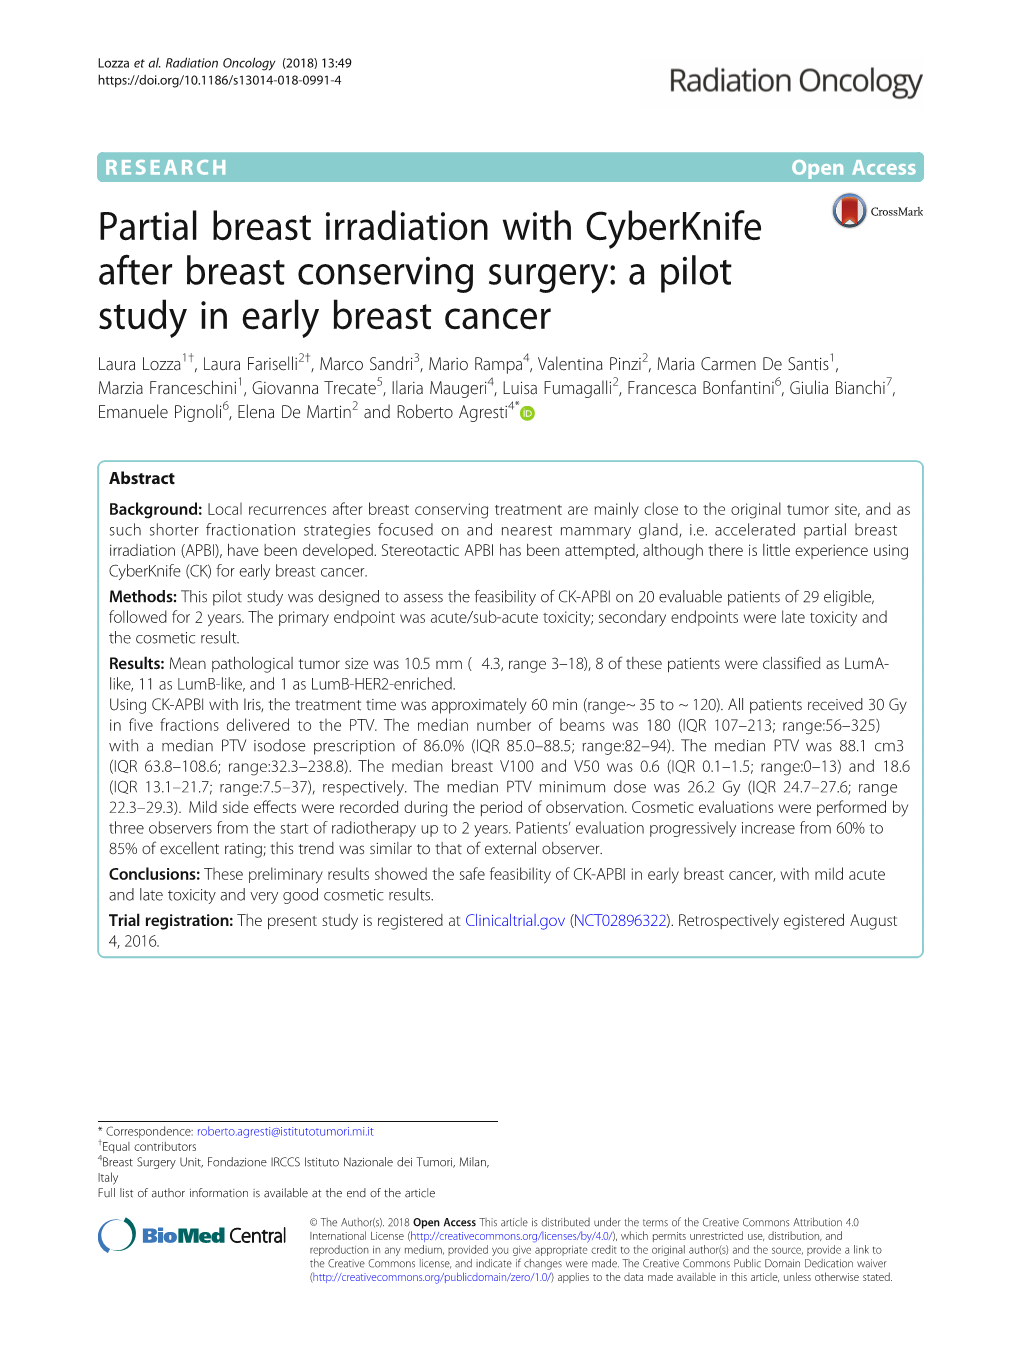 A Pilot Study in Early Breast Cancer